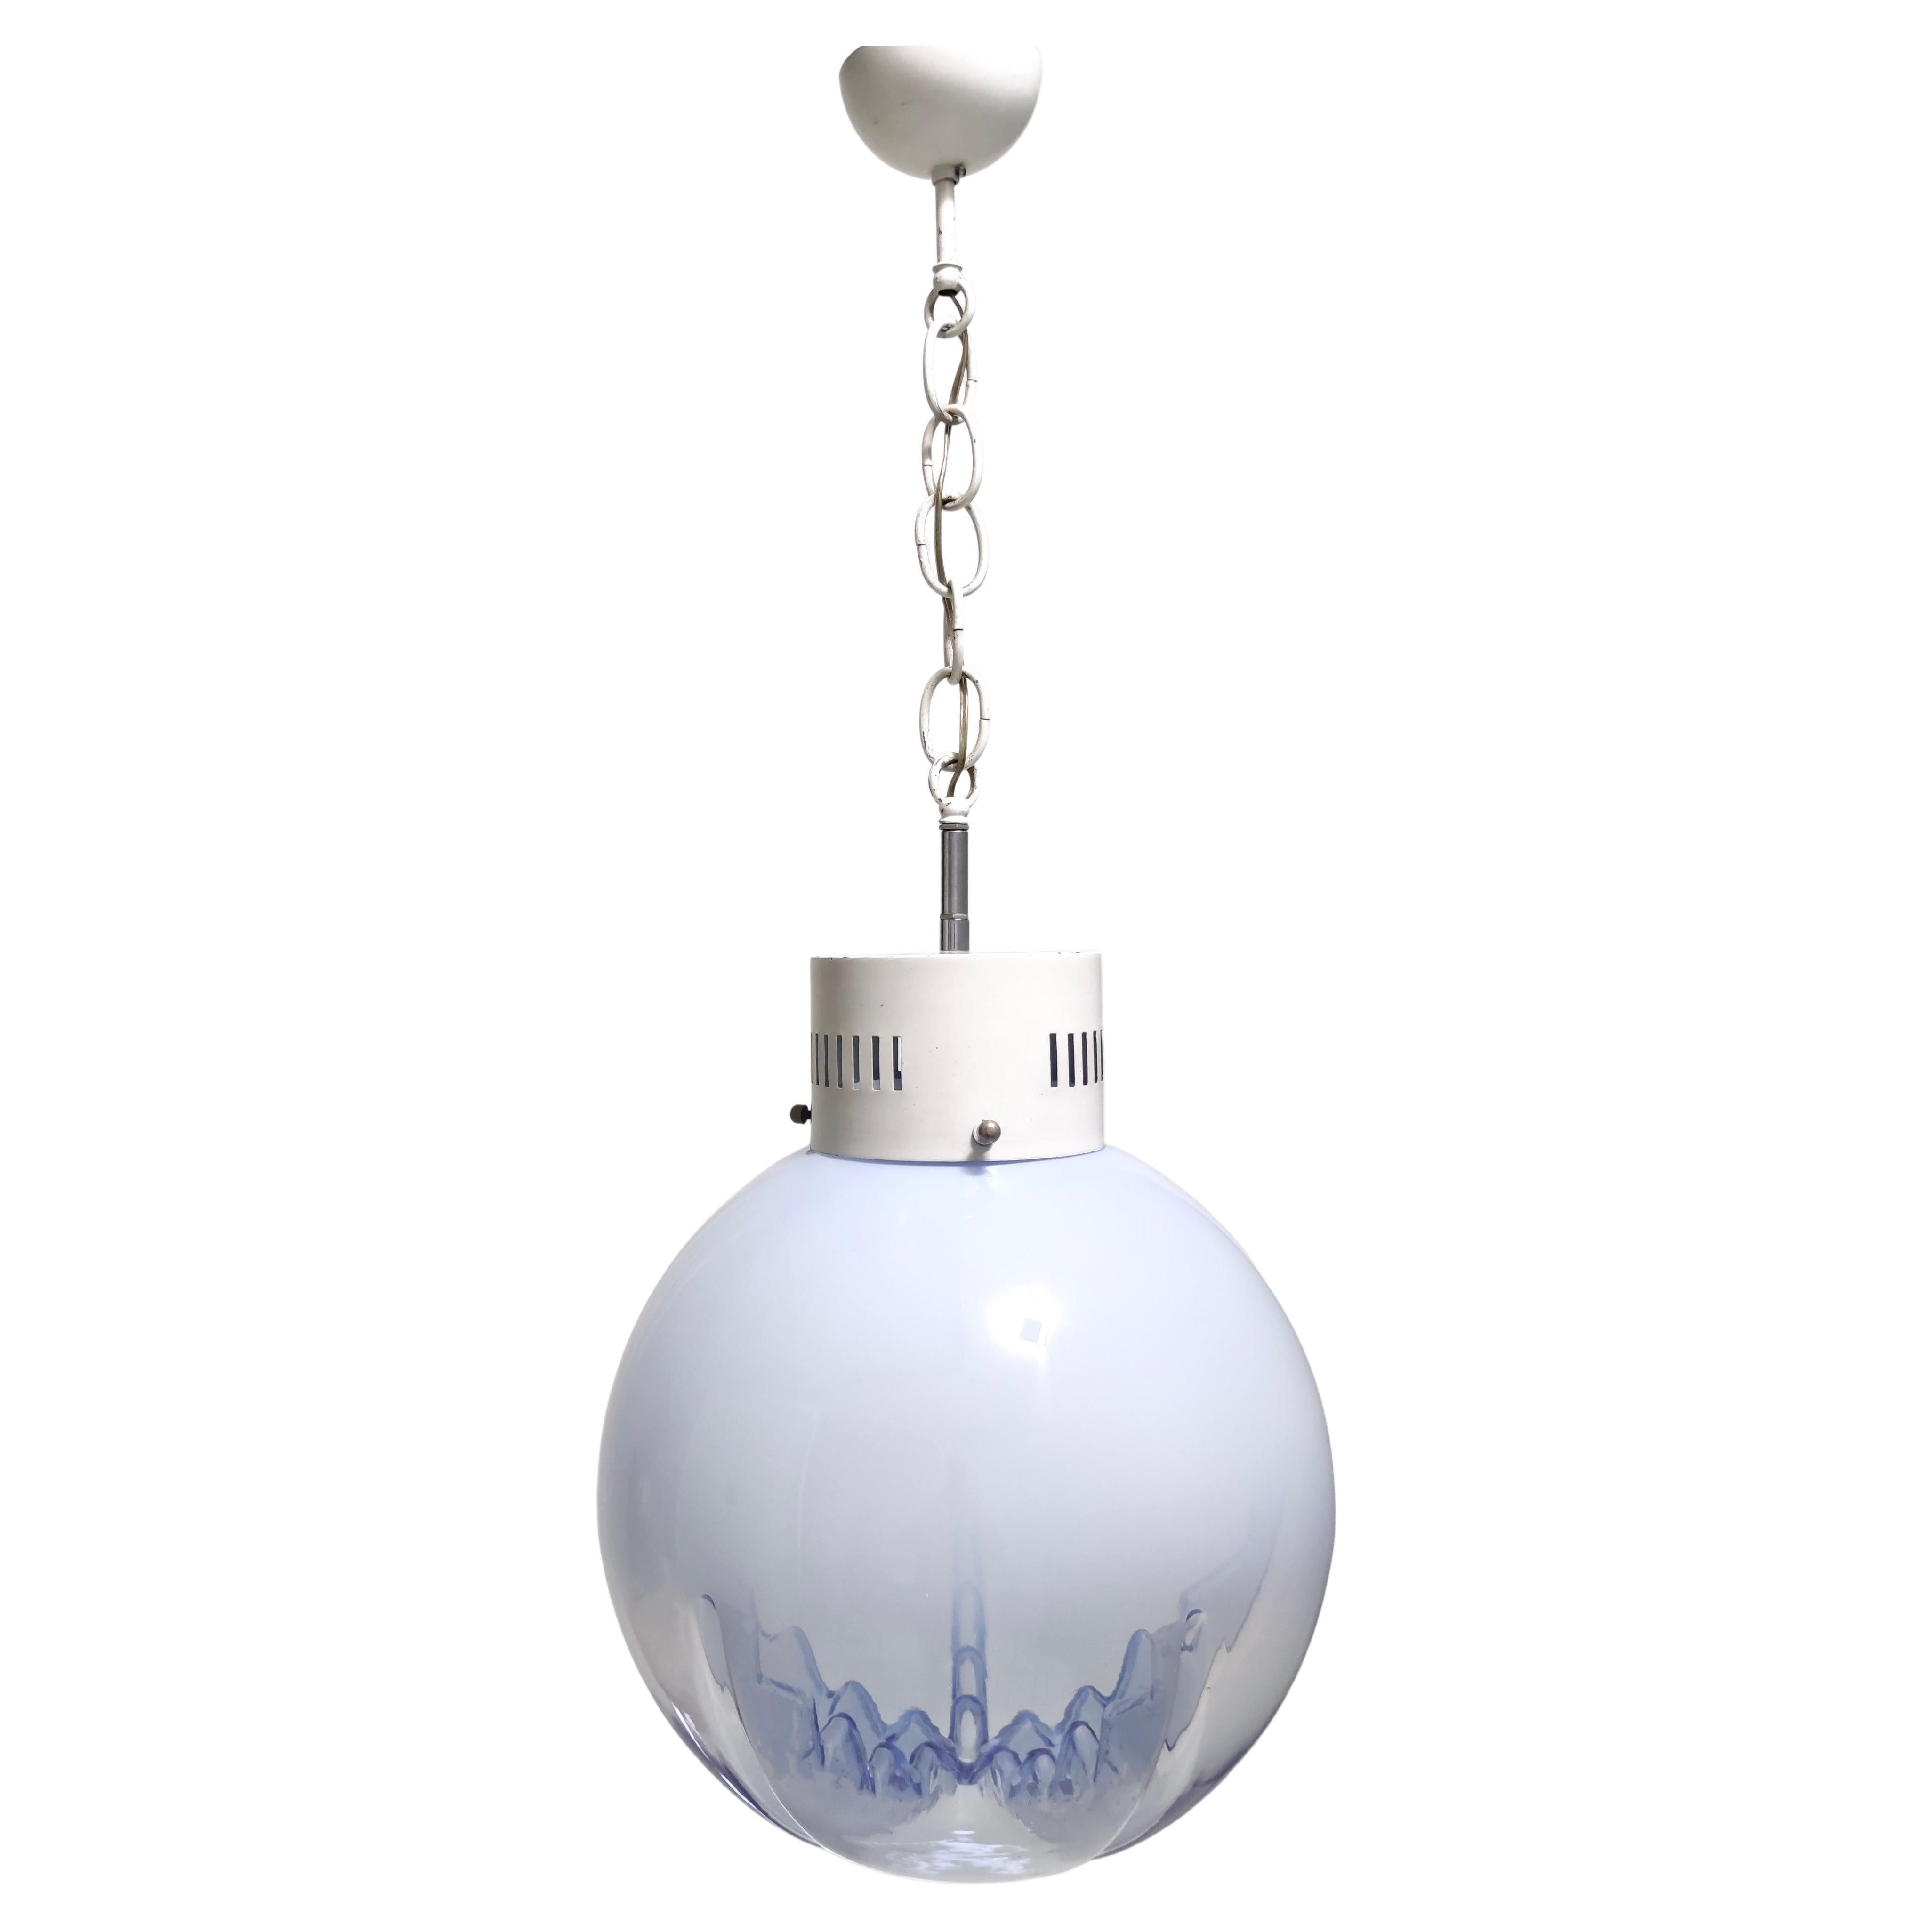 This is a high quality item, made in Italy, in the 70s. 
The pendant features a white varnished metal frame and a spherical transparent and blue Murano glass shade.

Nason is a well-known glass artist known for his use of historical techniques in